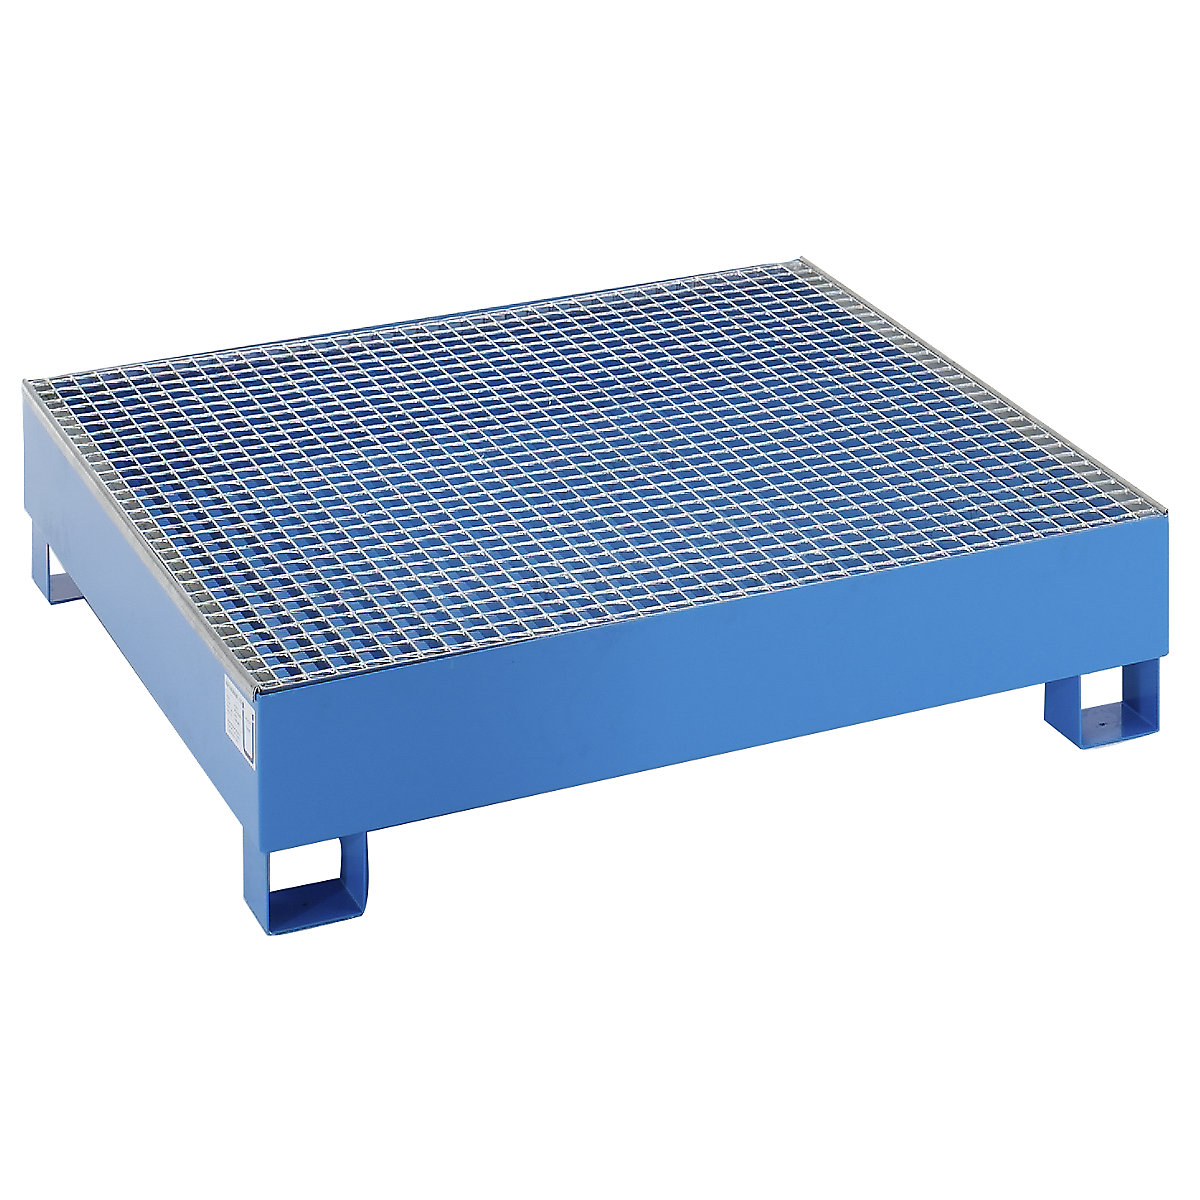 Steel sump tray for 200 l drums – eurokraft basic, LxWxH 1200 x 1200 x 285 mm, with certification, powder coated blue, with grate-2